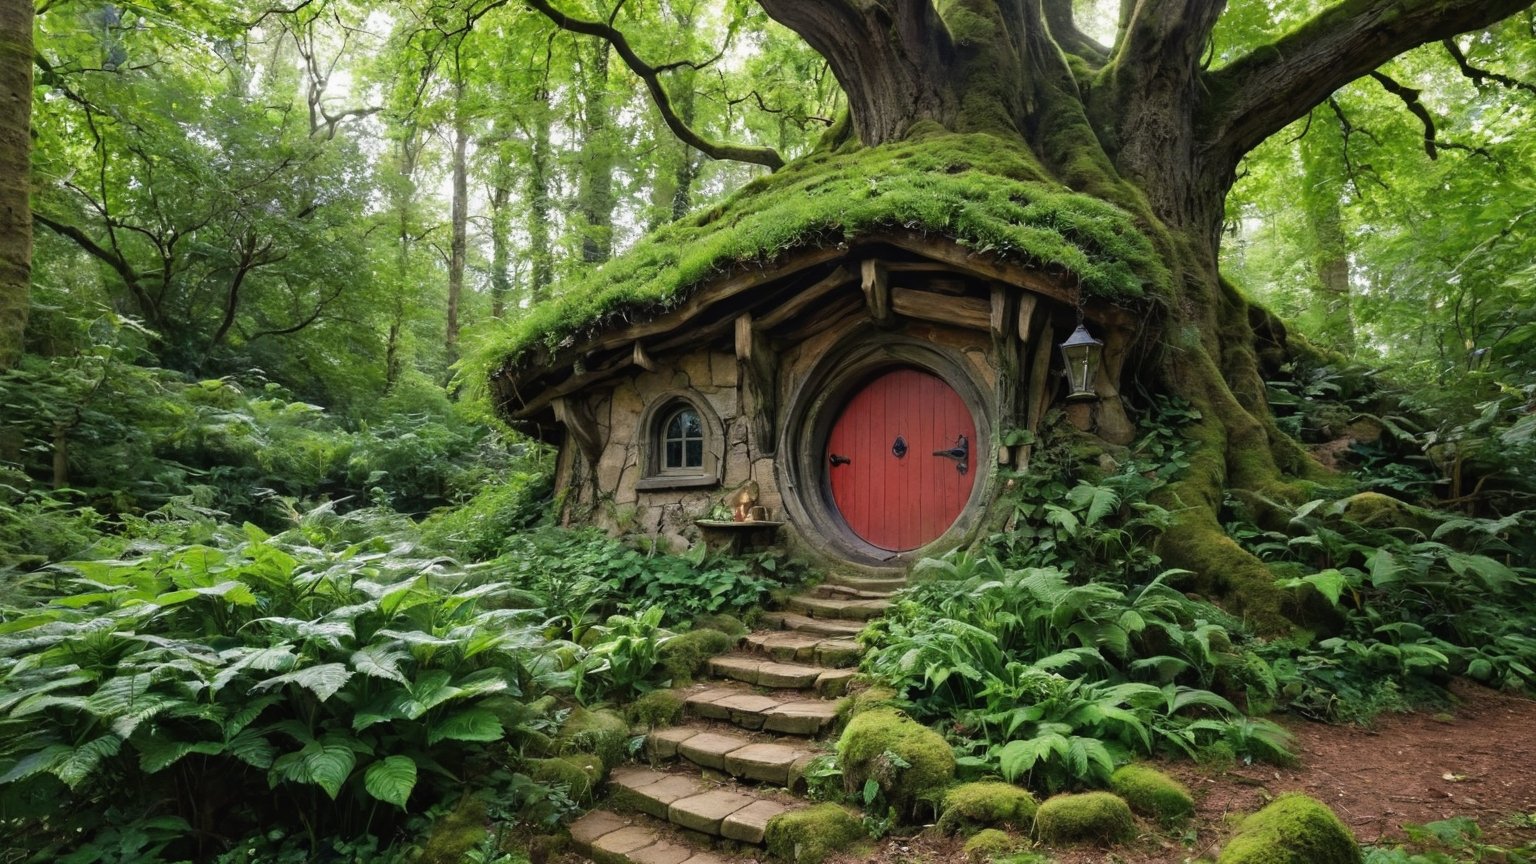 "Describe a magical home hidden deep within an enchanted forest, where every room holds a secret and every corner whispers with the echoes of ancient spells. Who lives there, and what wondrous adventures unfold within its walls?"